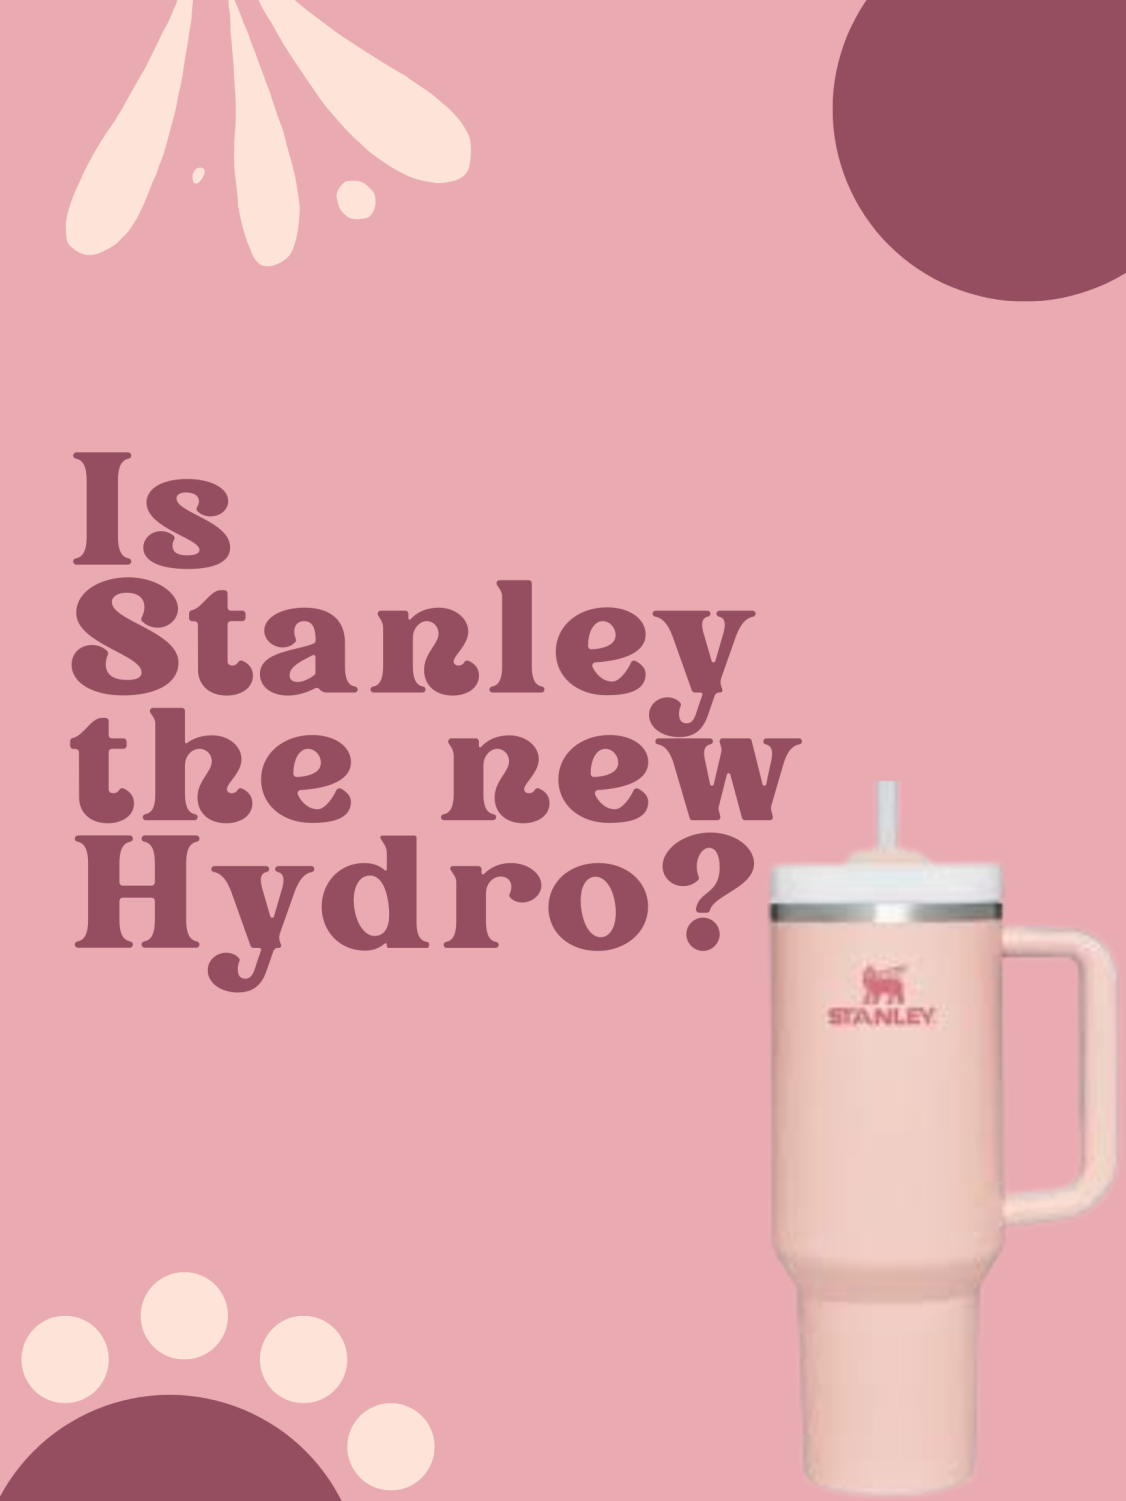 https://thegatorseye.com/wp-content/uploads/2023/02/Is-Stanley-the-new-Hydro.png